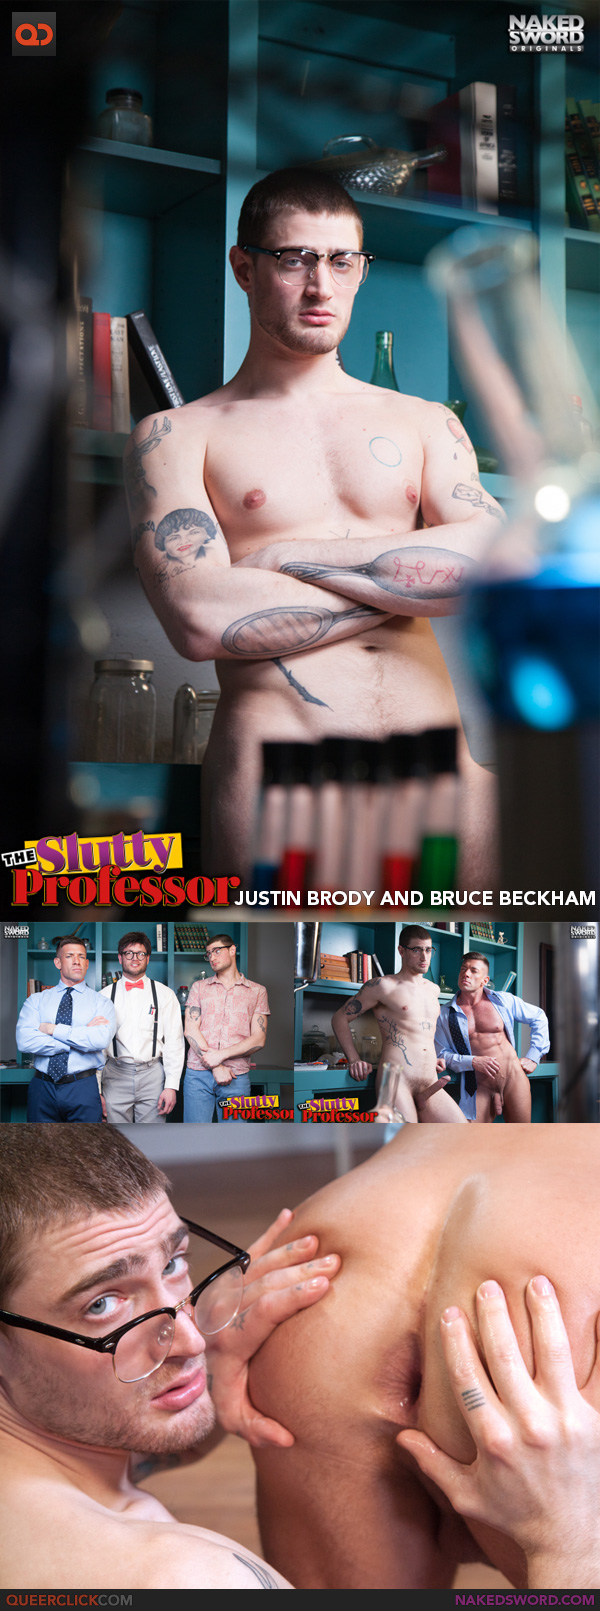 Naked Sword: Justin Brody and Bruce Beckham